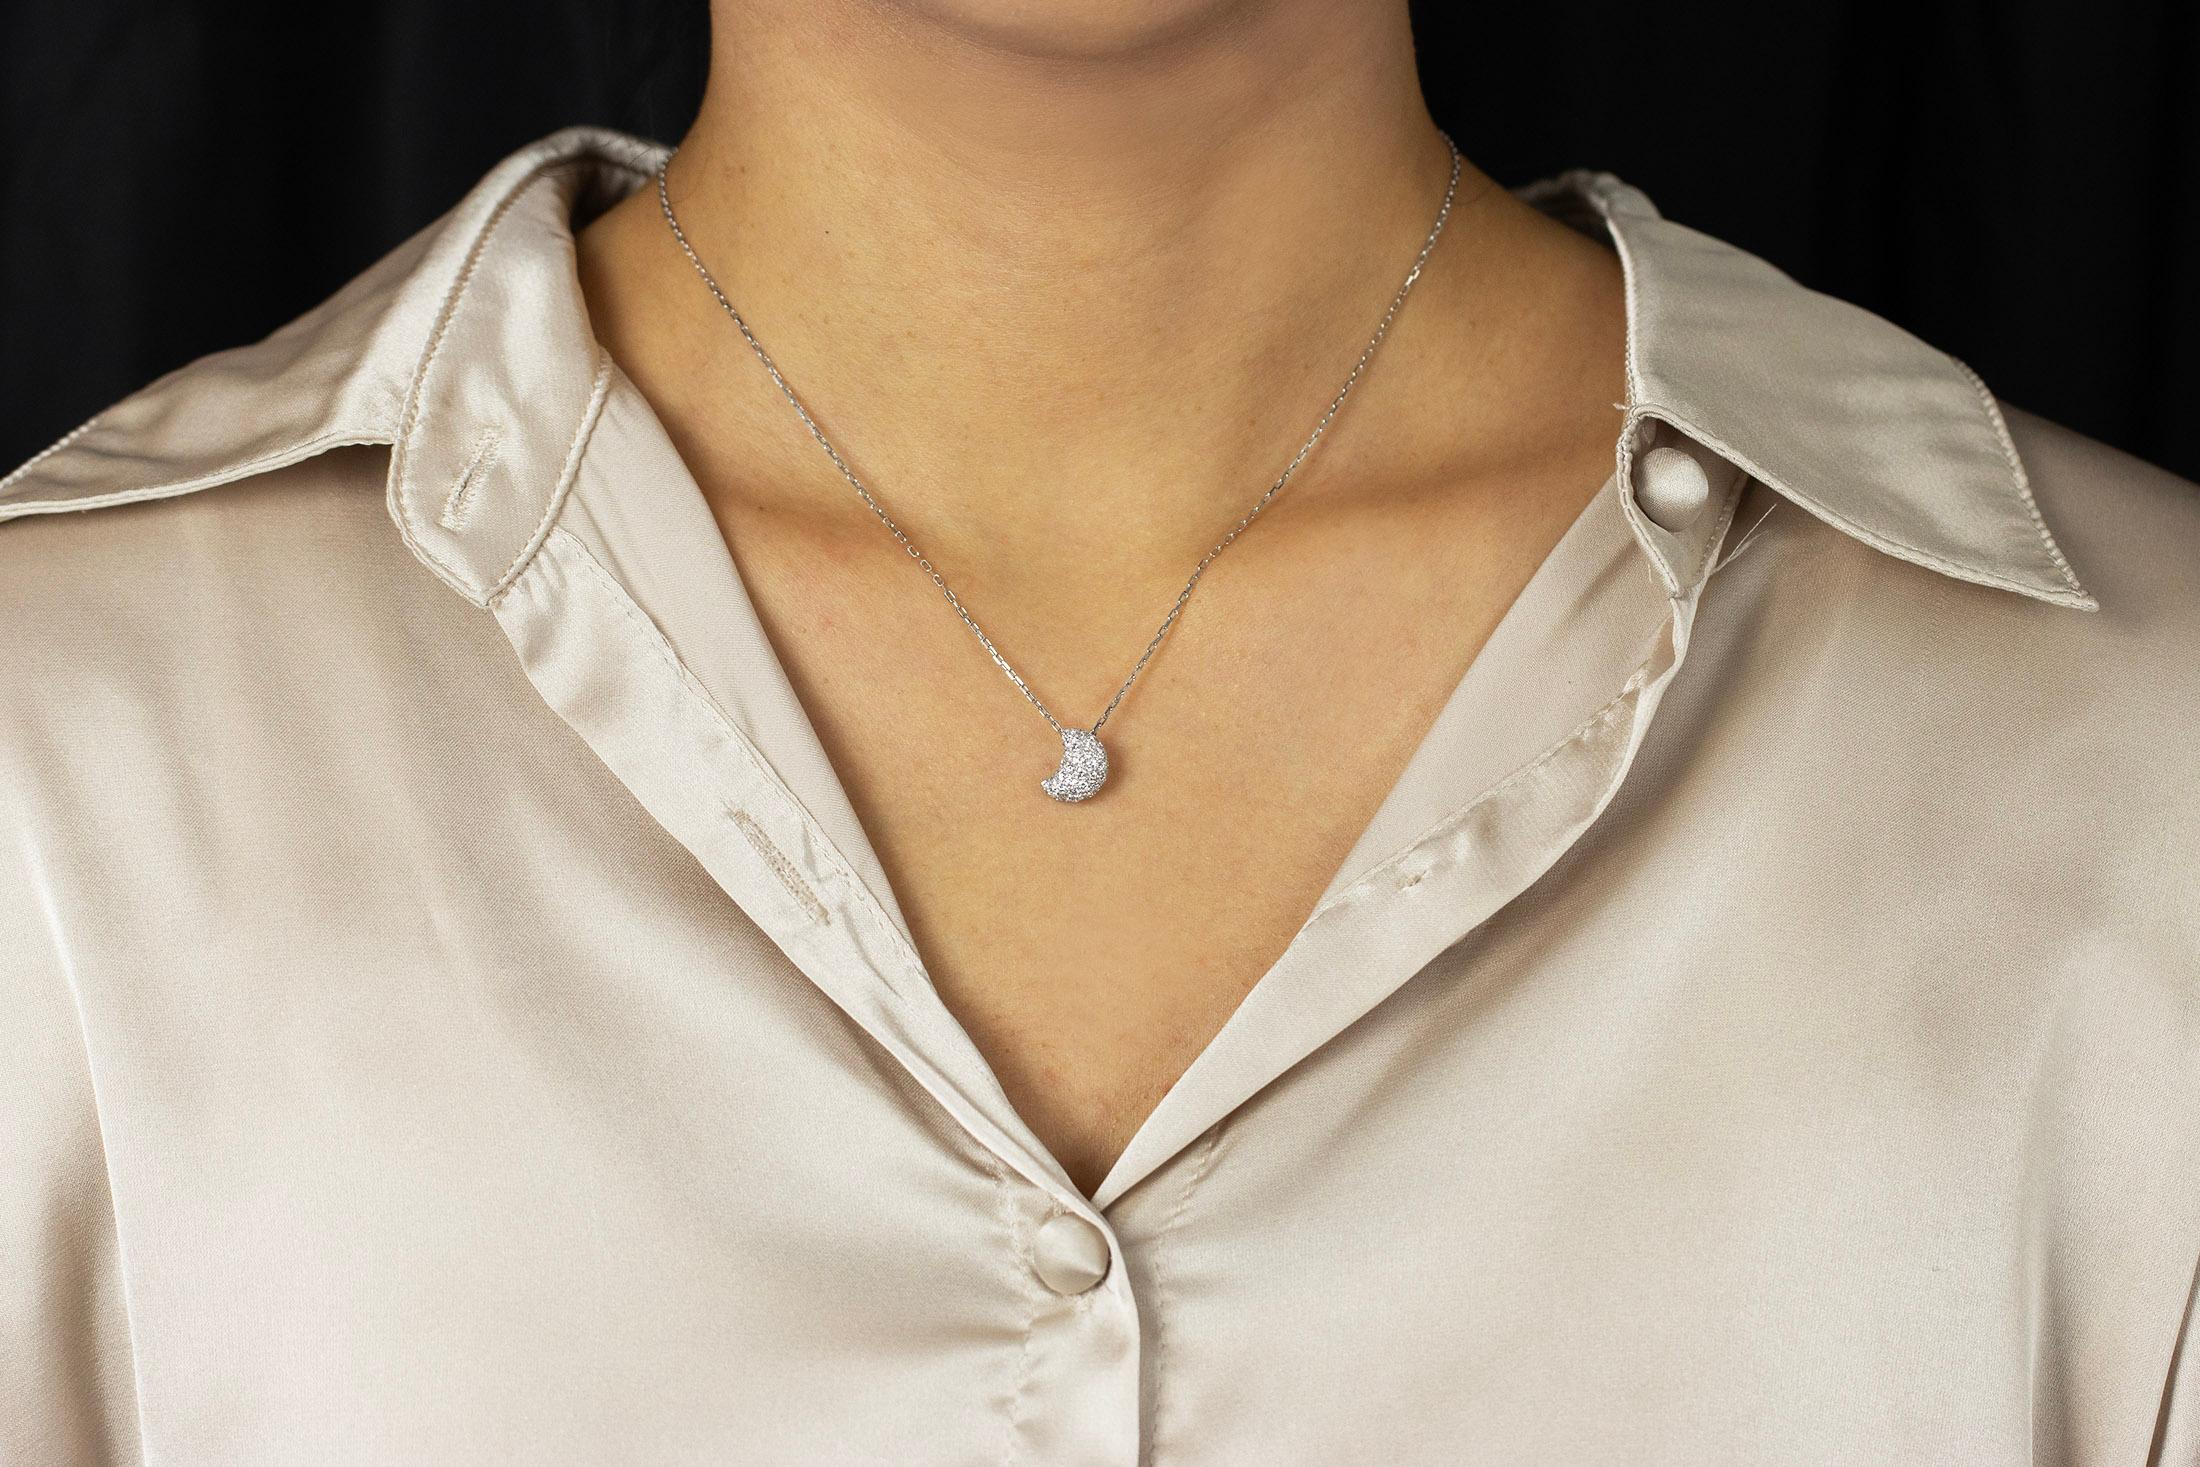 This simple yet brilliant pendant necklace showcasing a three dimensional crescent moon, micro-pave set with round brilliant diamonds. Diamonds weigh 0.77 carats total. Made in 18K white gold. Suspended on an 16 inch white gold chain.

Roman Malakov